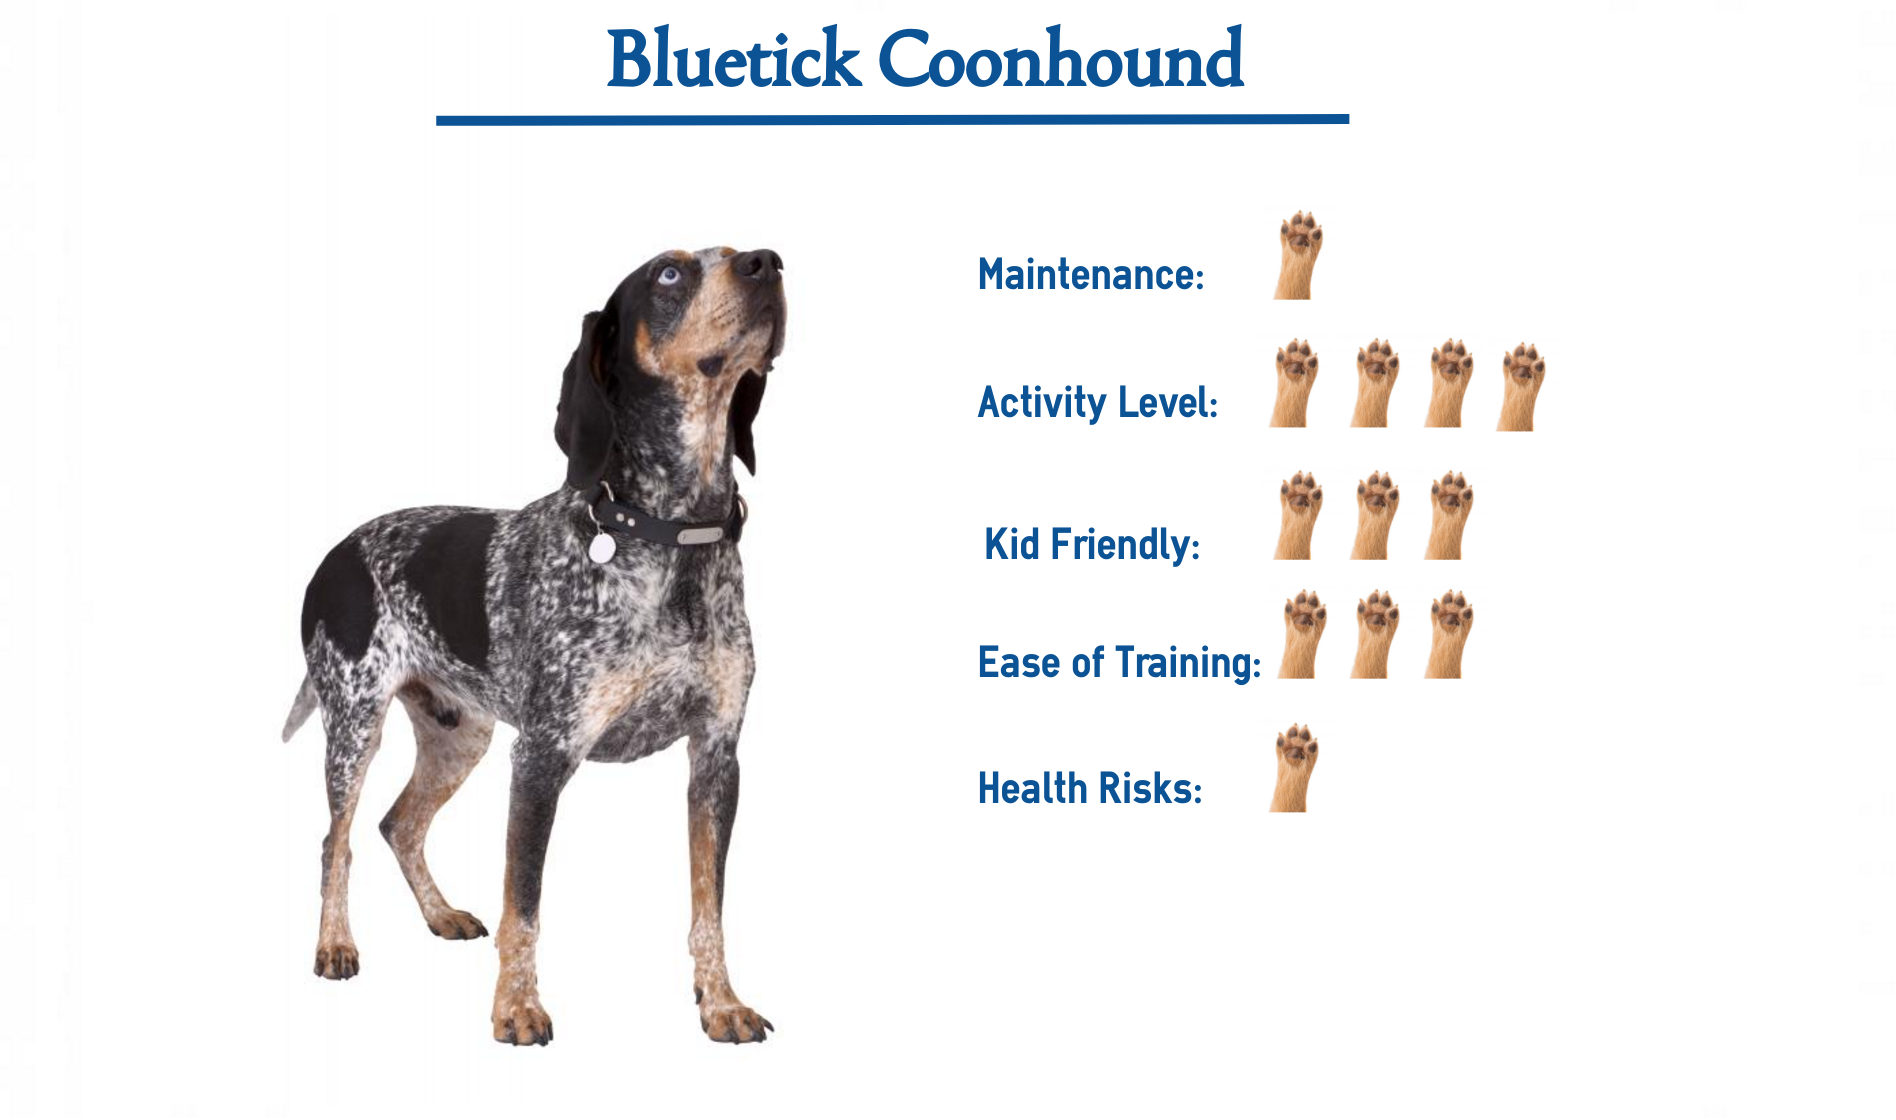 Bluetick Coonhound Everything You Need To Know At A Glance,Lychee Fruit Images